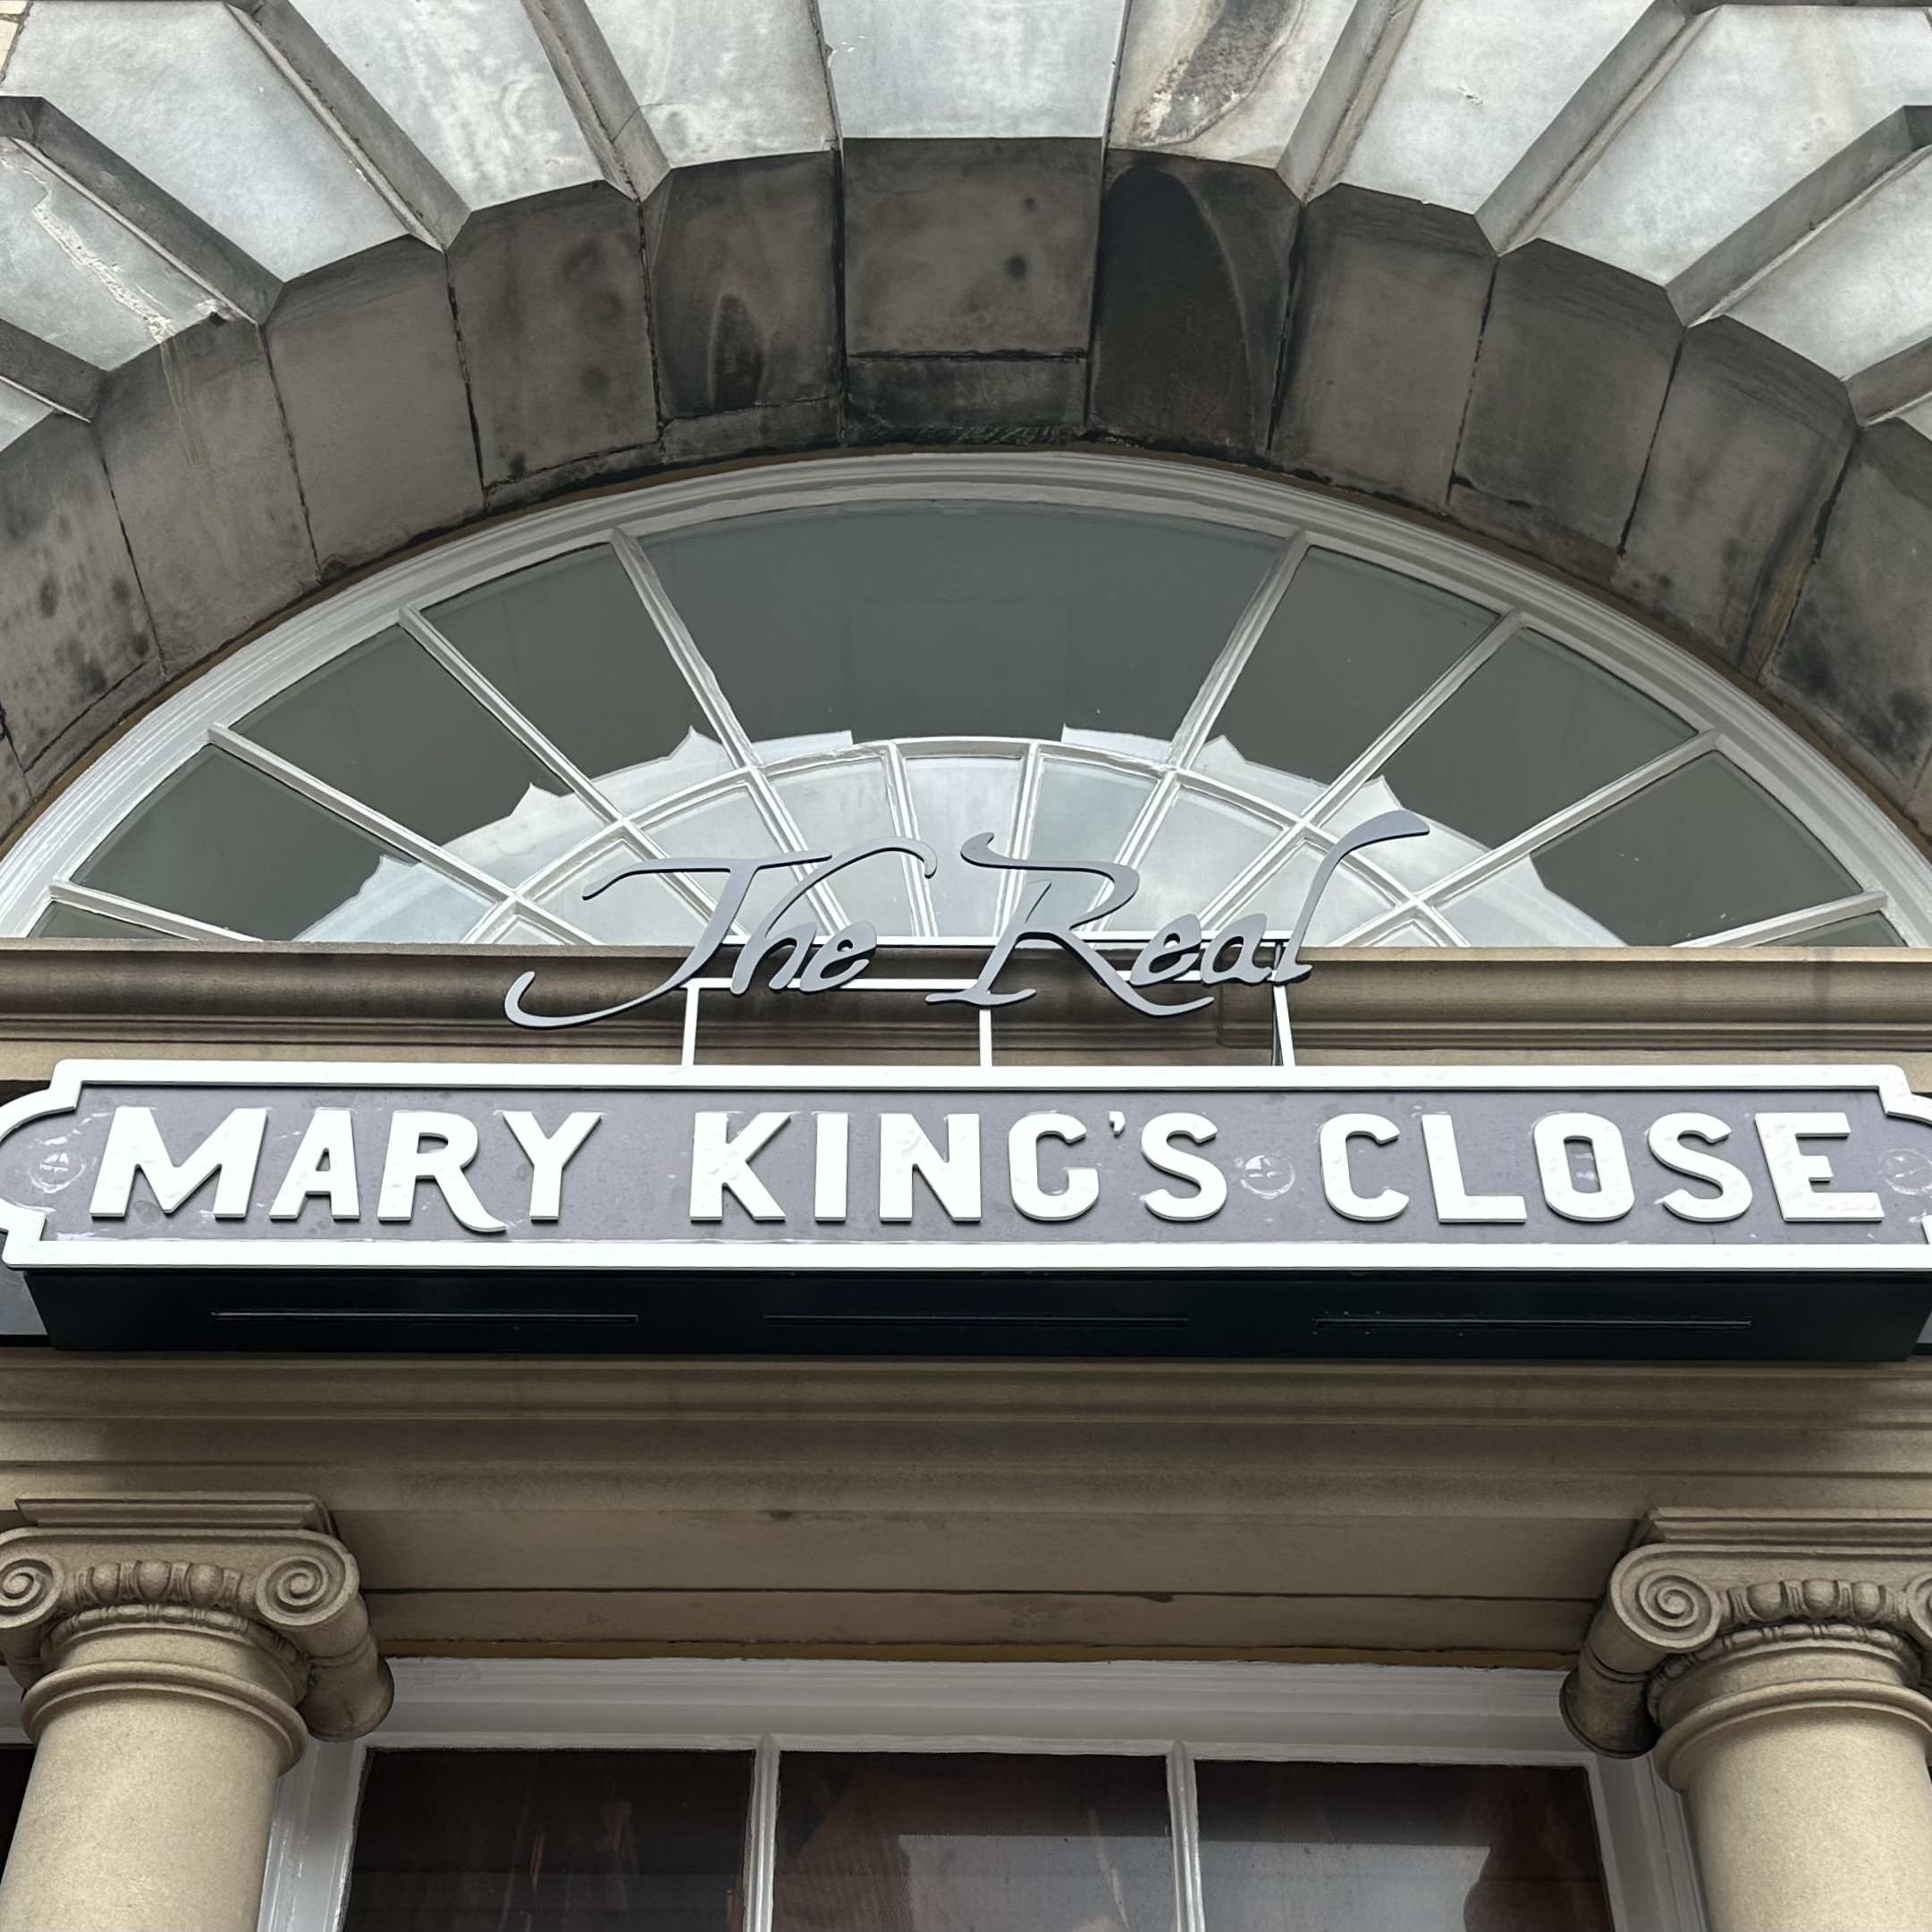 Real Mary Kings Close building